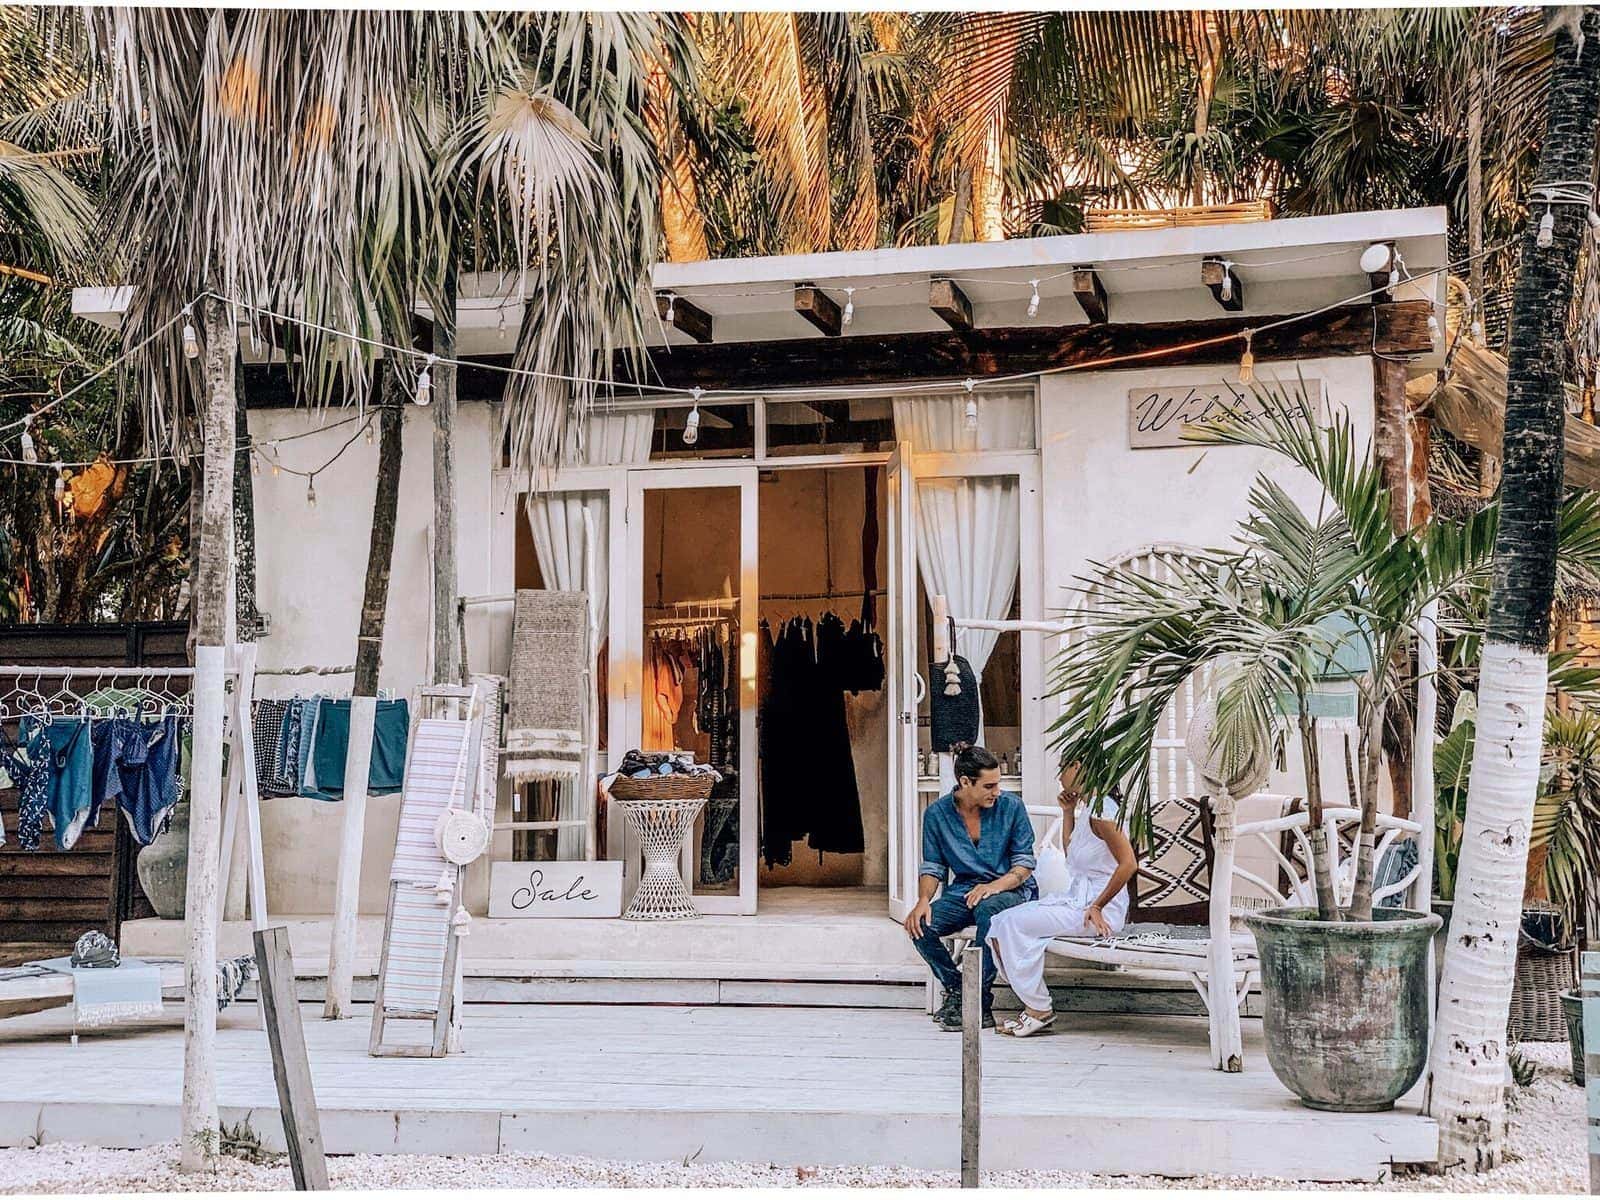 Tulum has a large number of boho and hippie shops